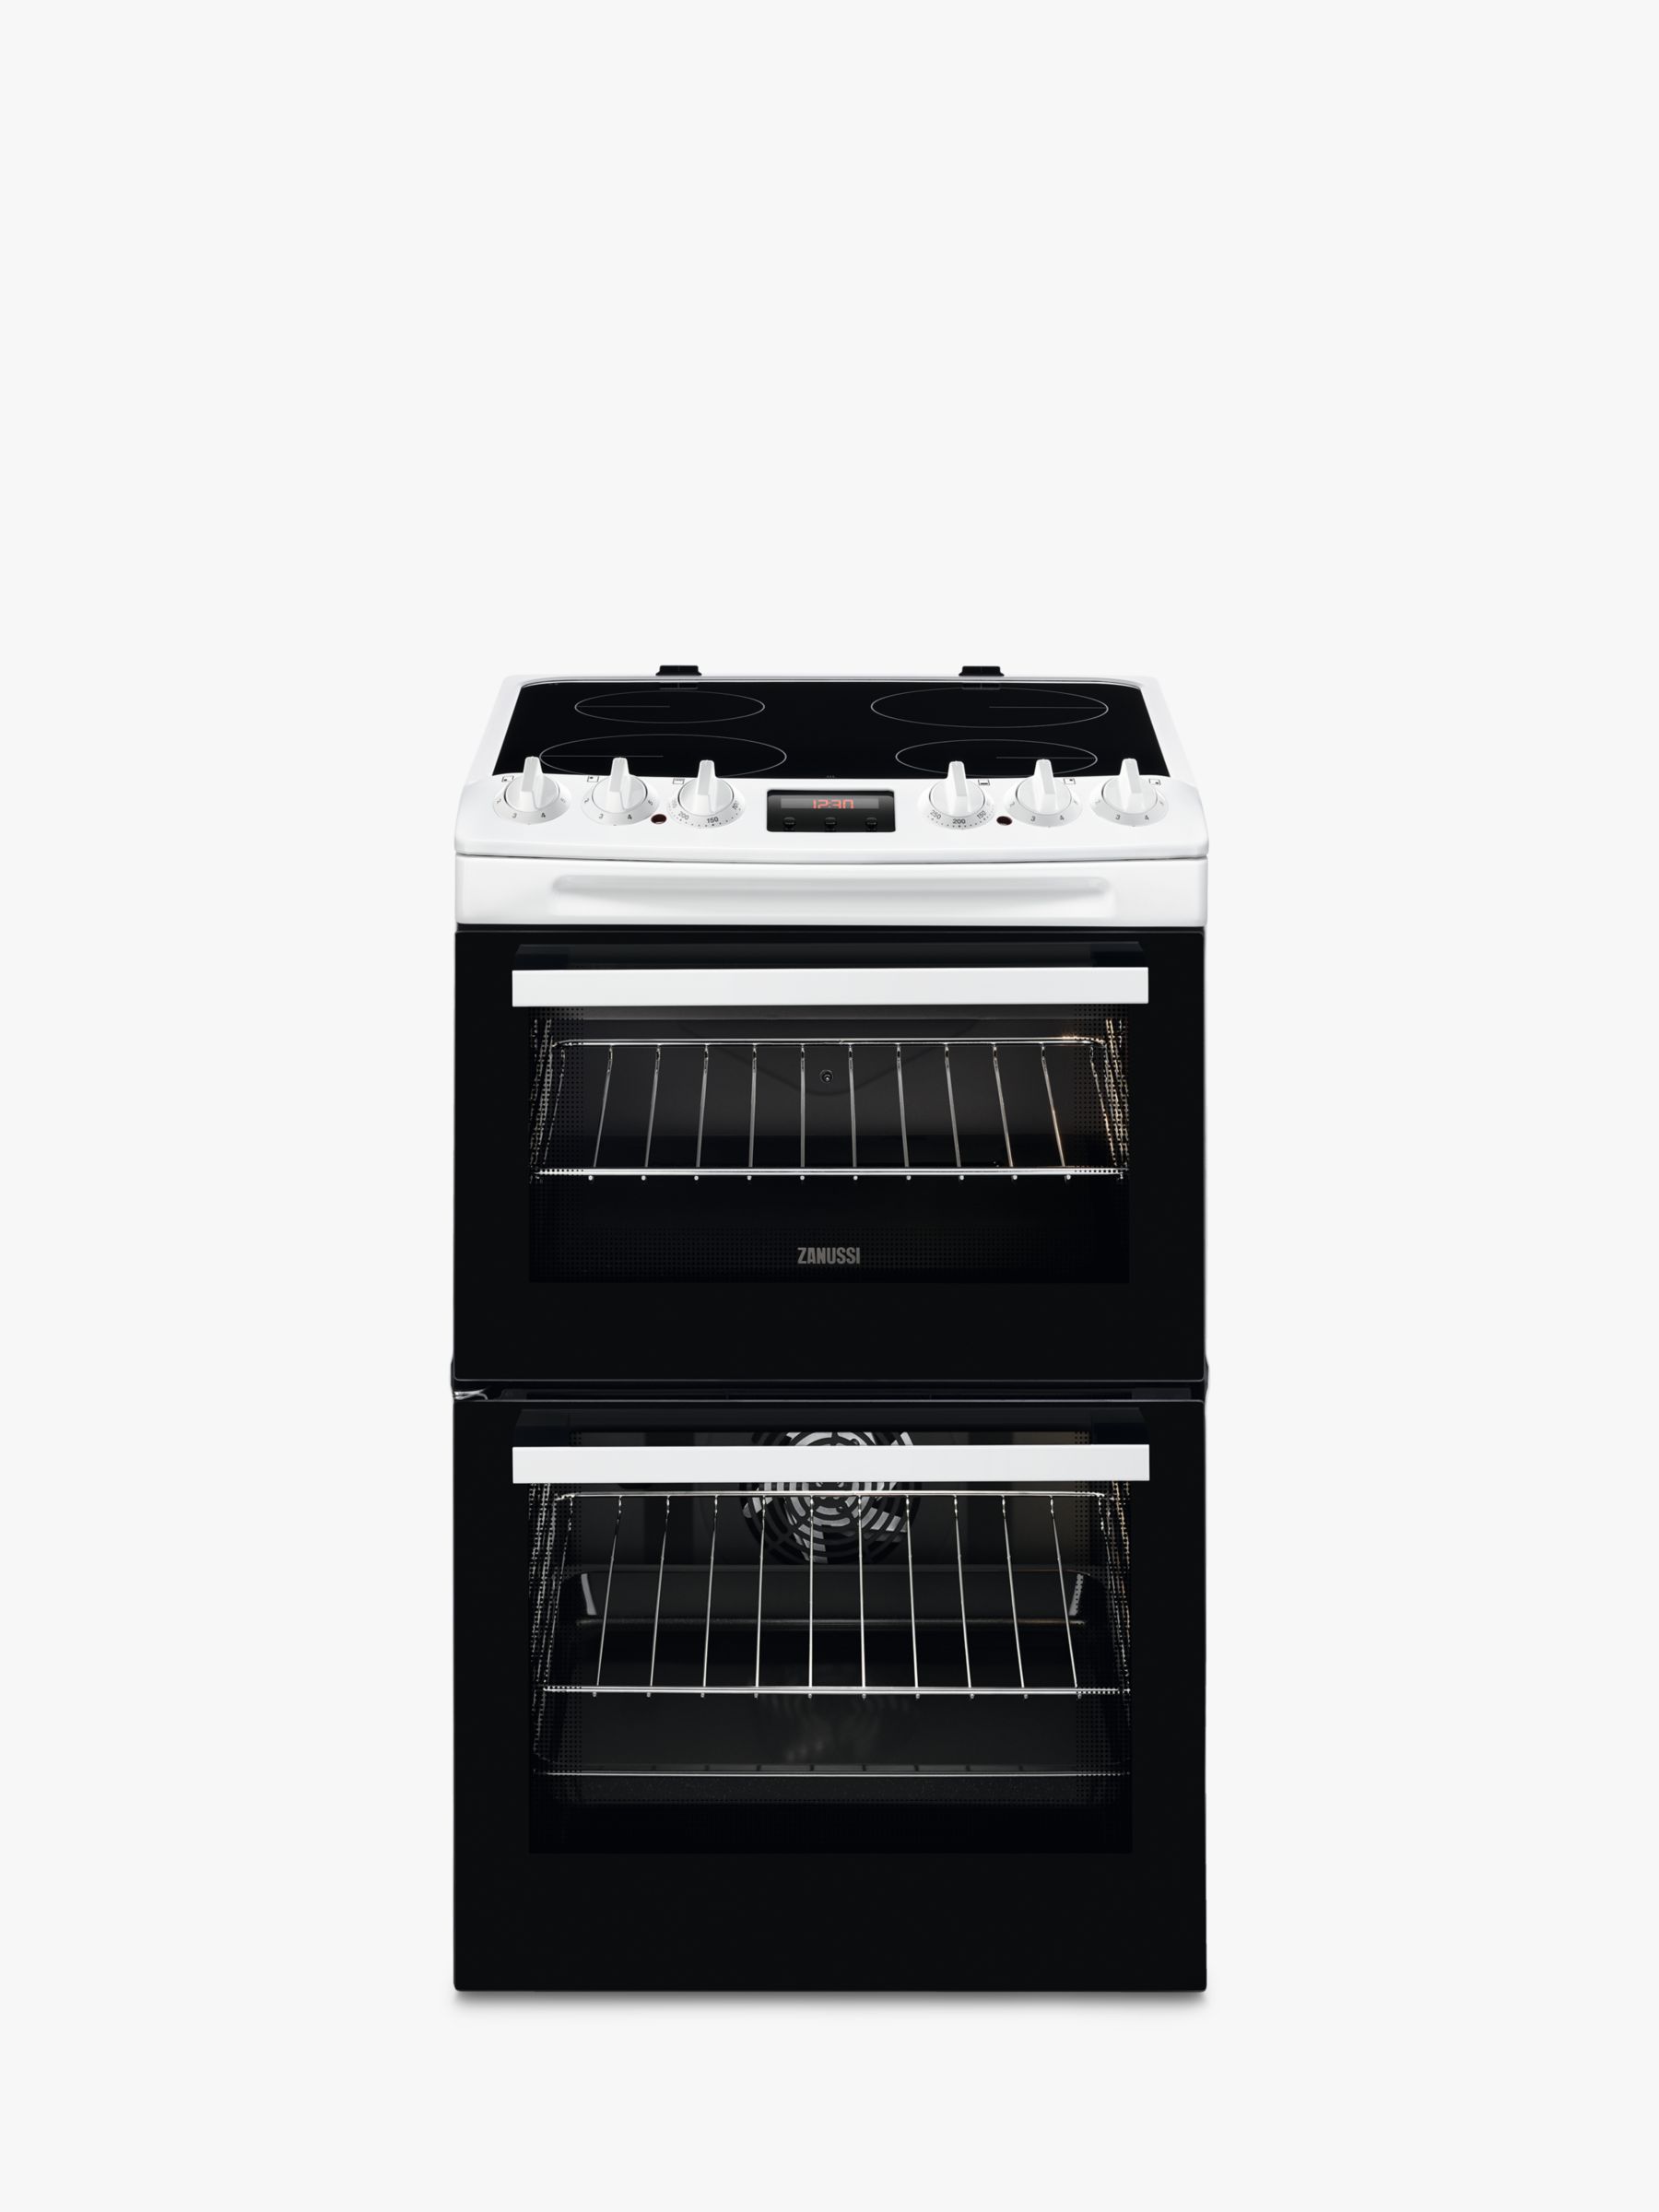 55cm double oven electric cooker